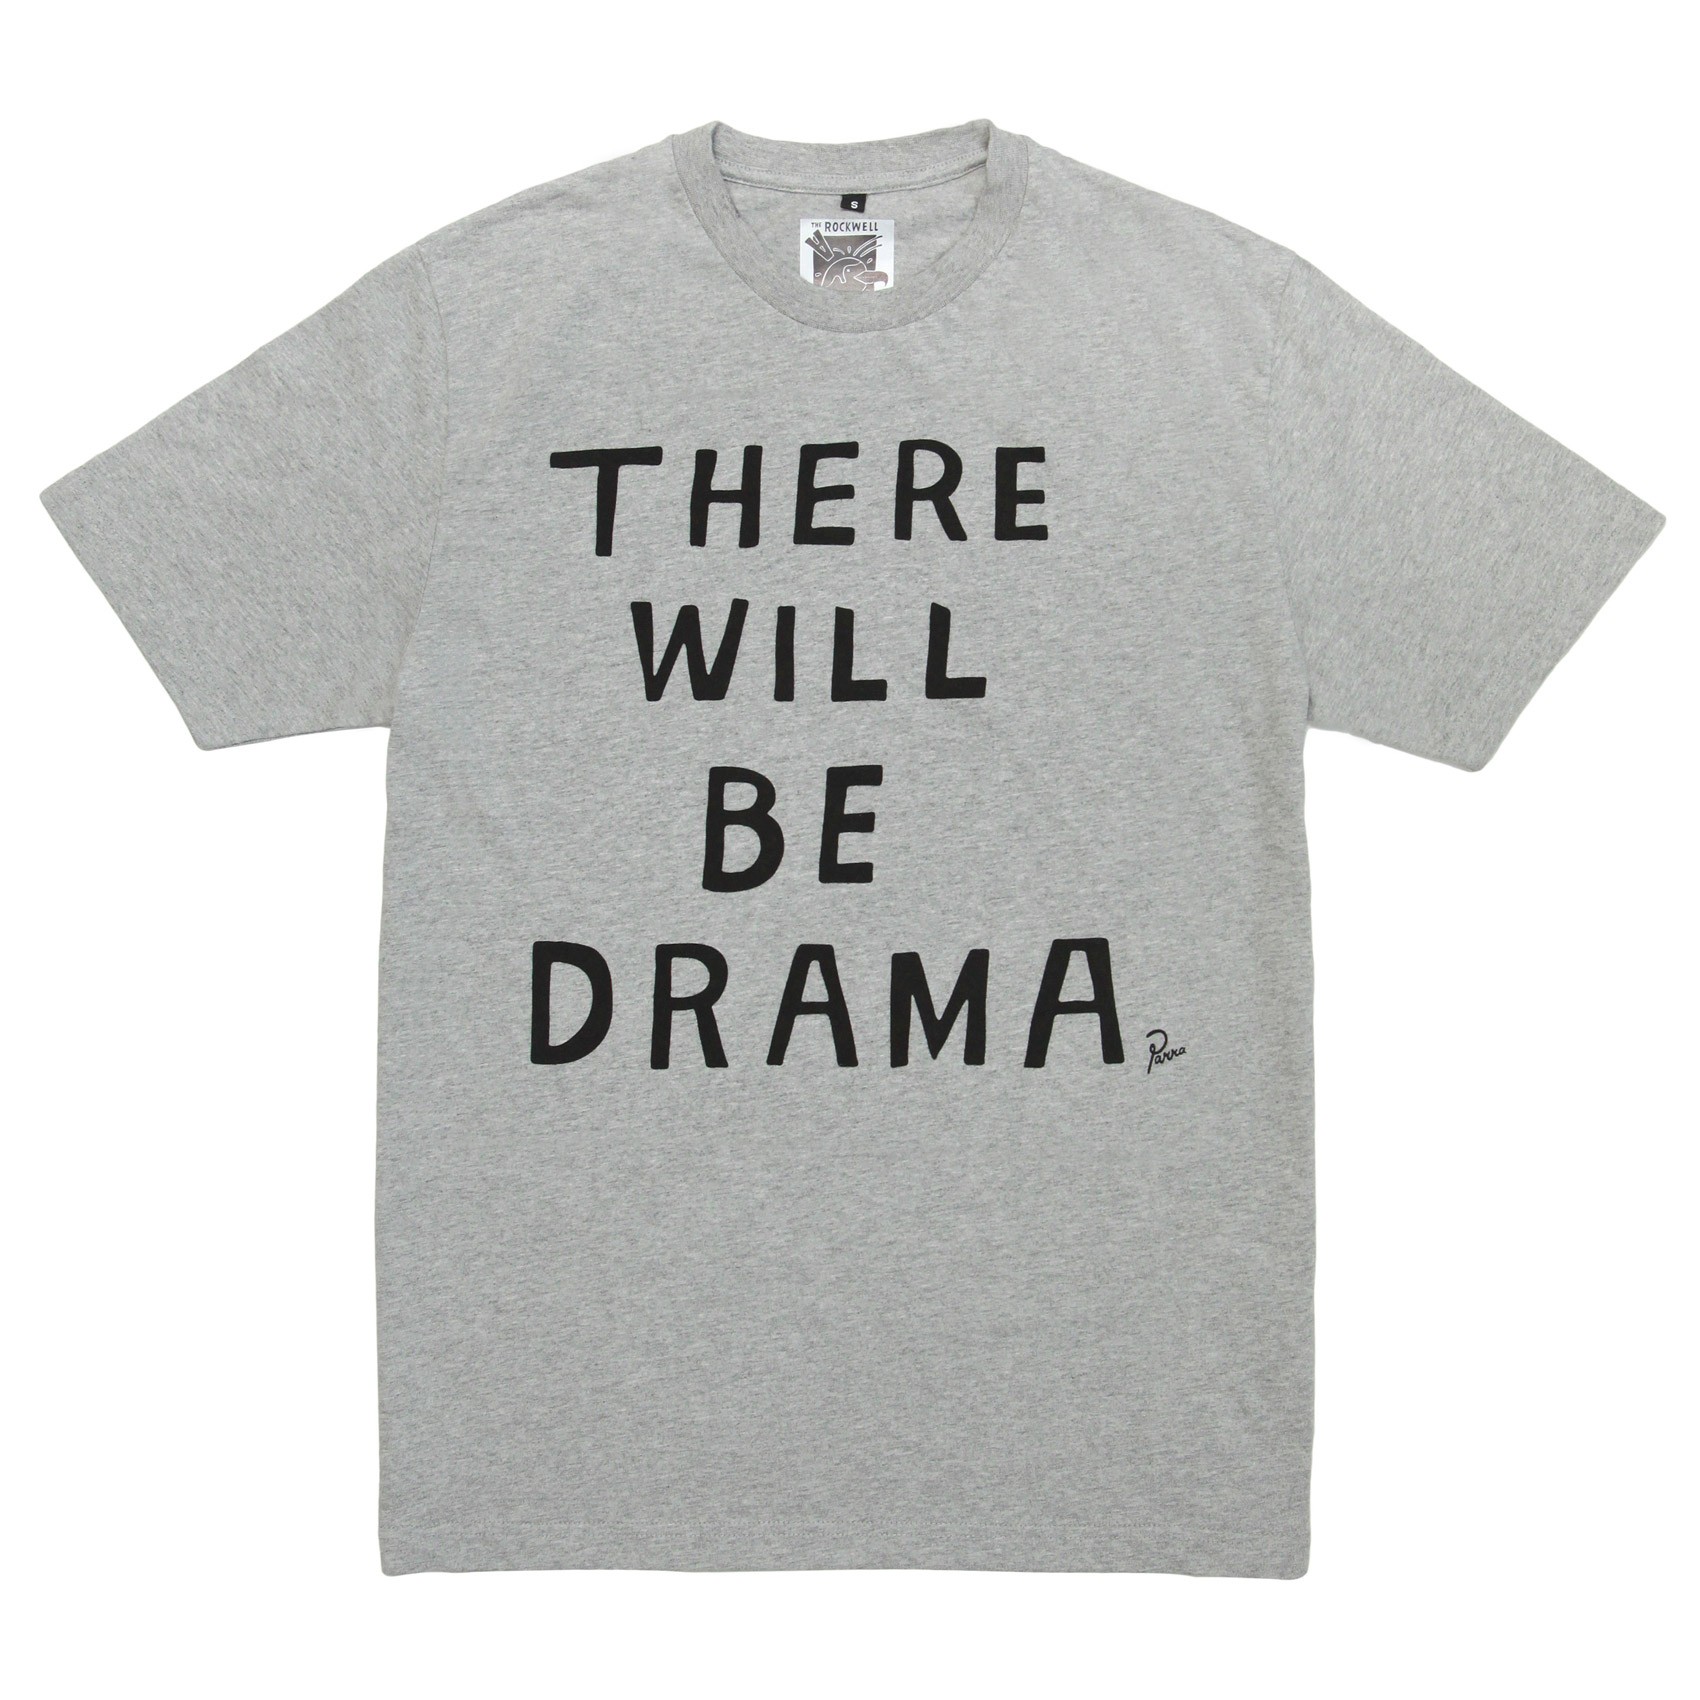 There will be drama